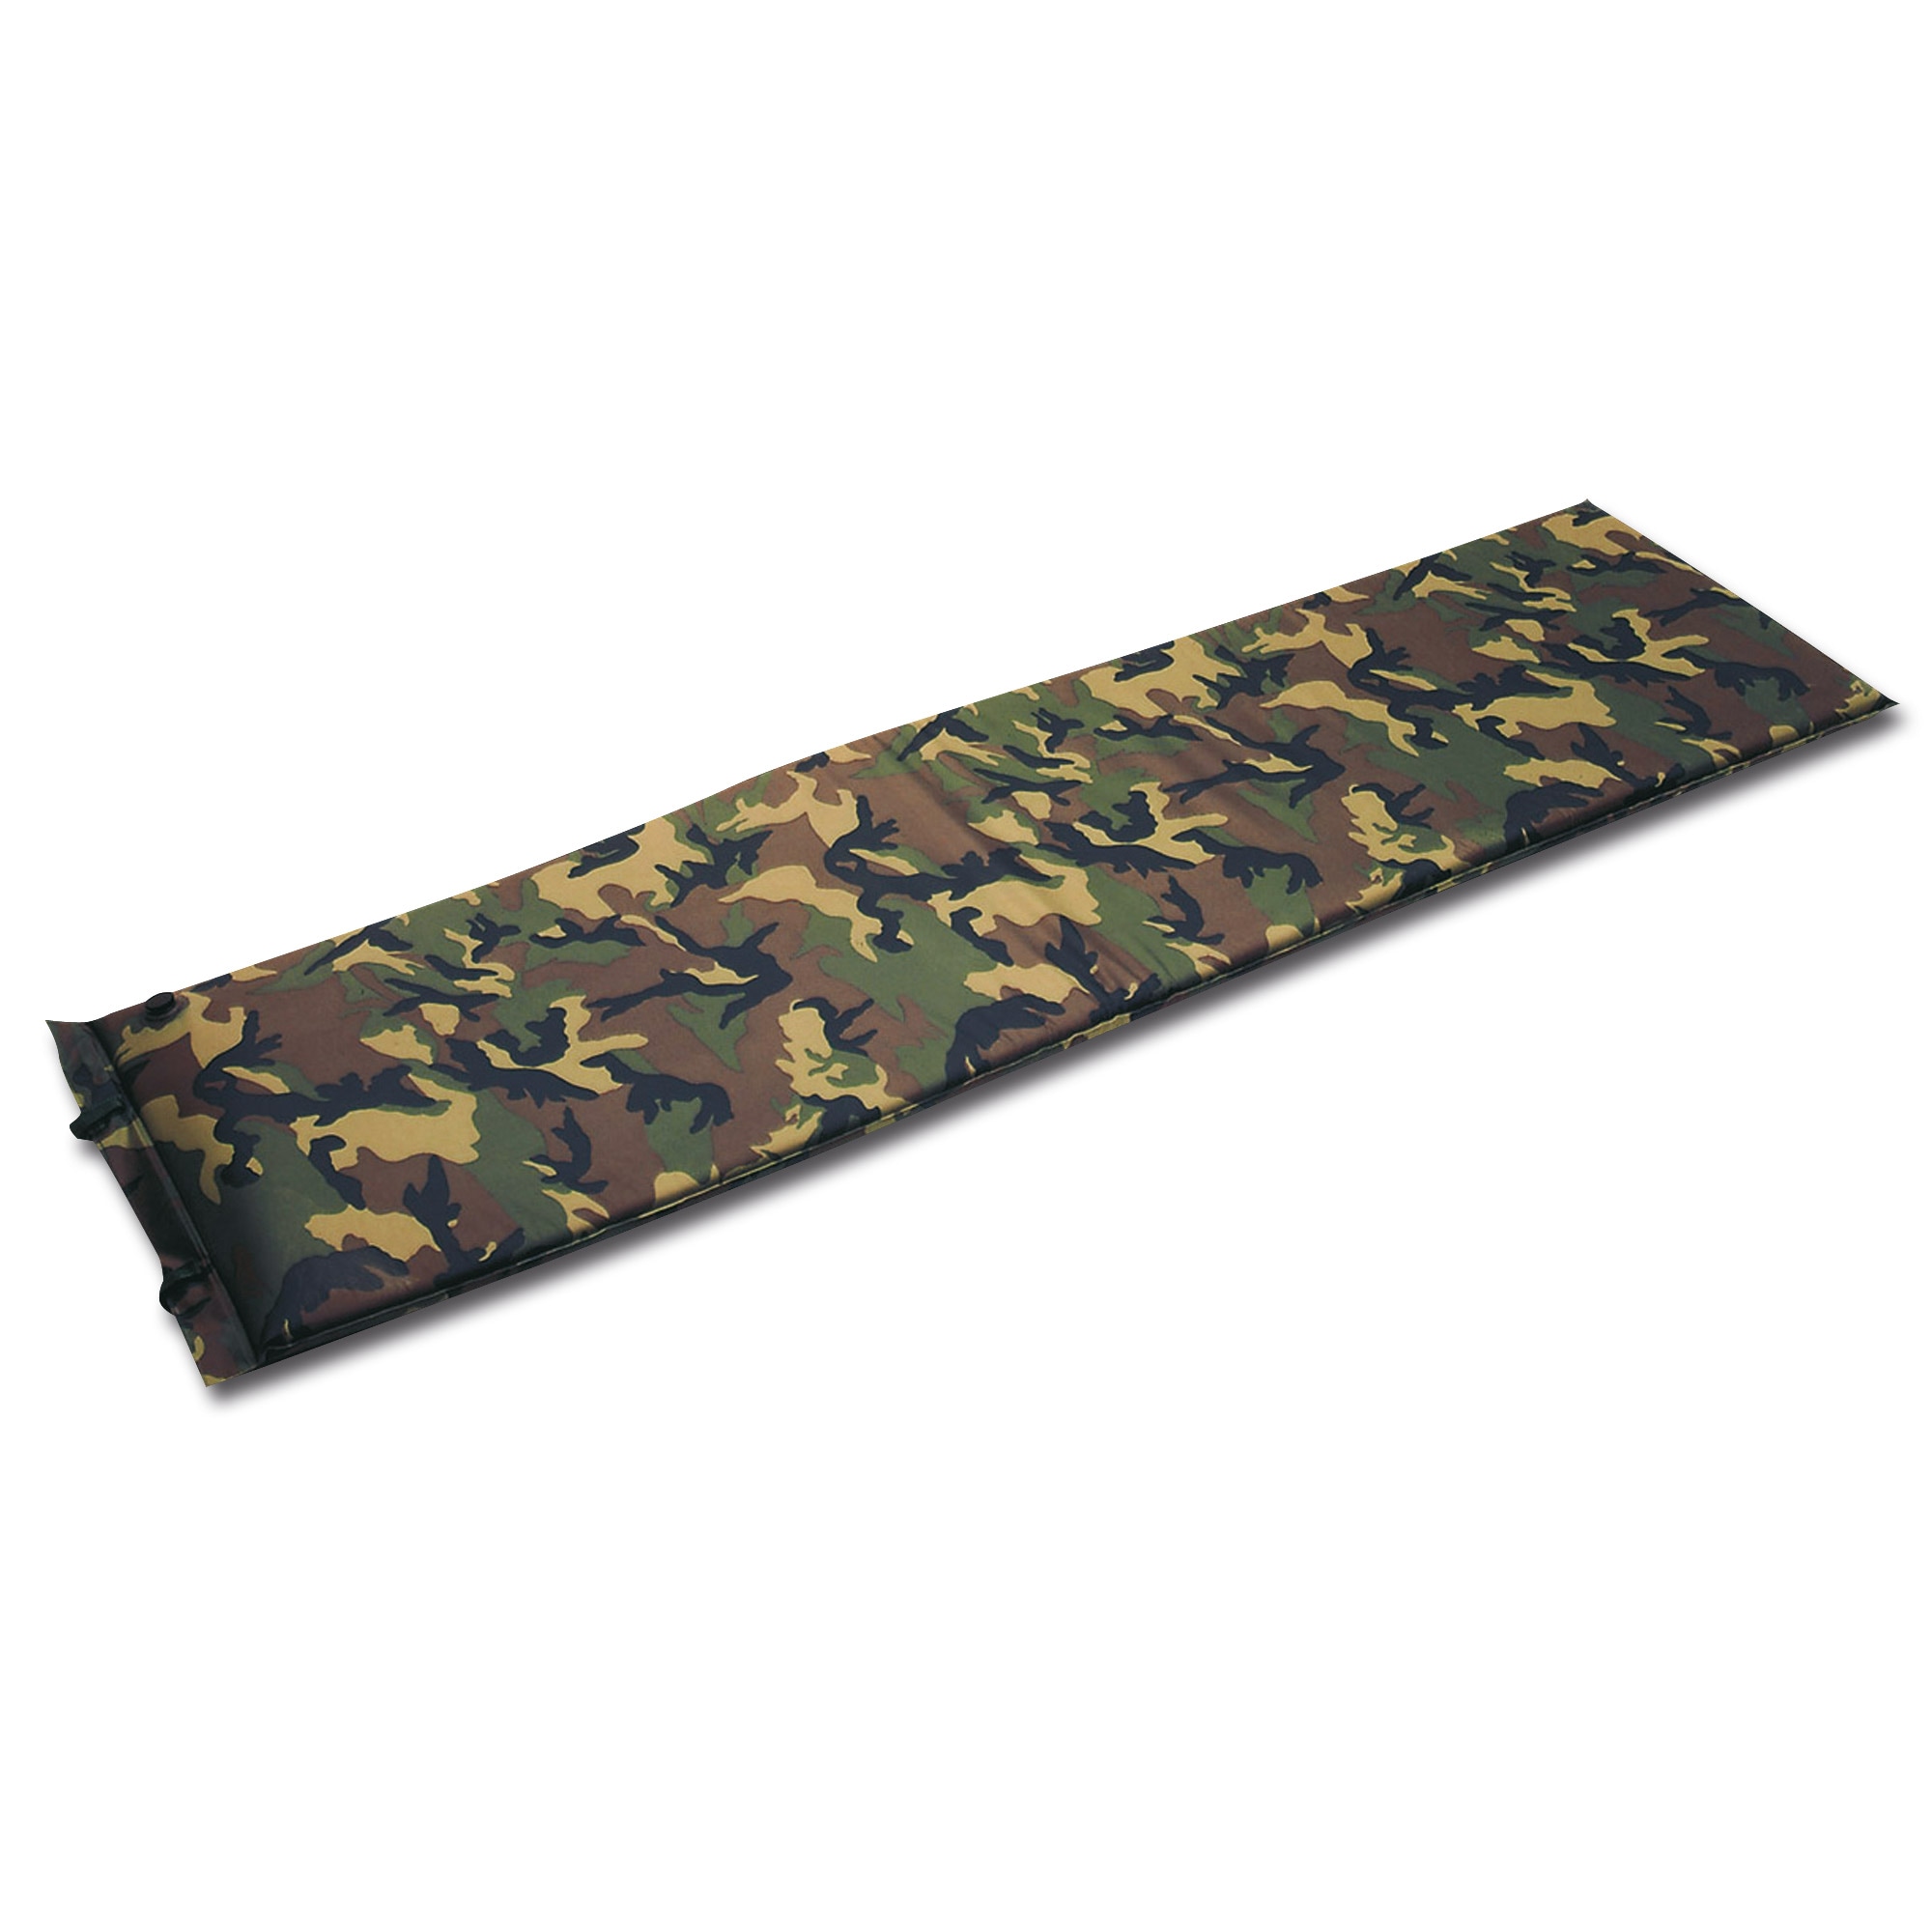 Lightweight Camping Air Bed Woodland Camo Thermal SELF INFLATING ROLL MAT 